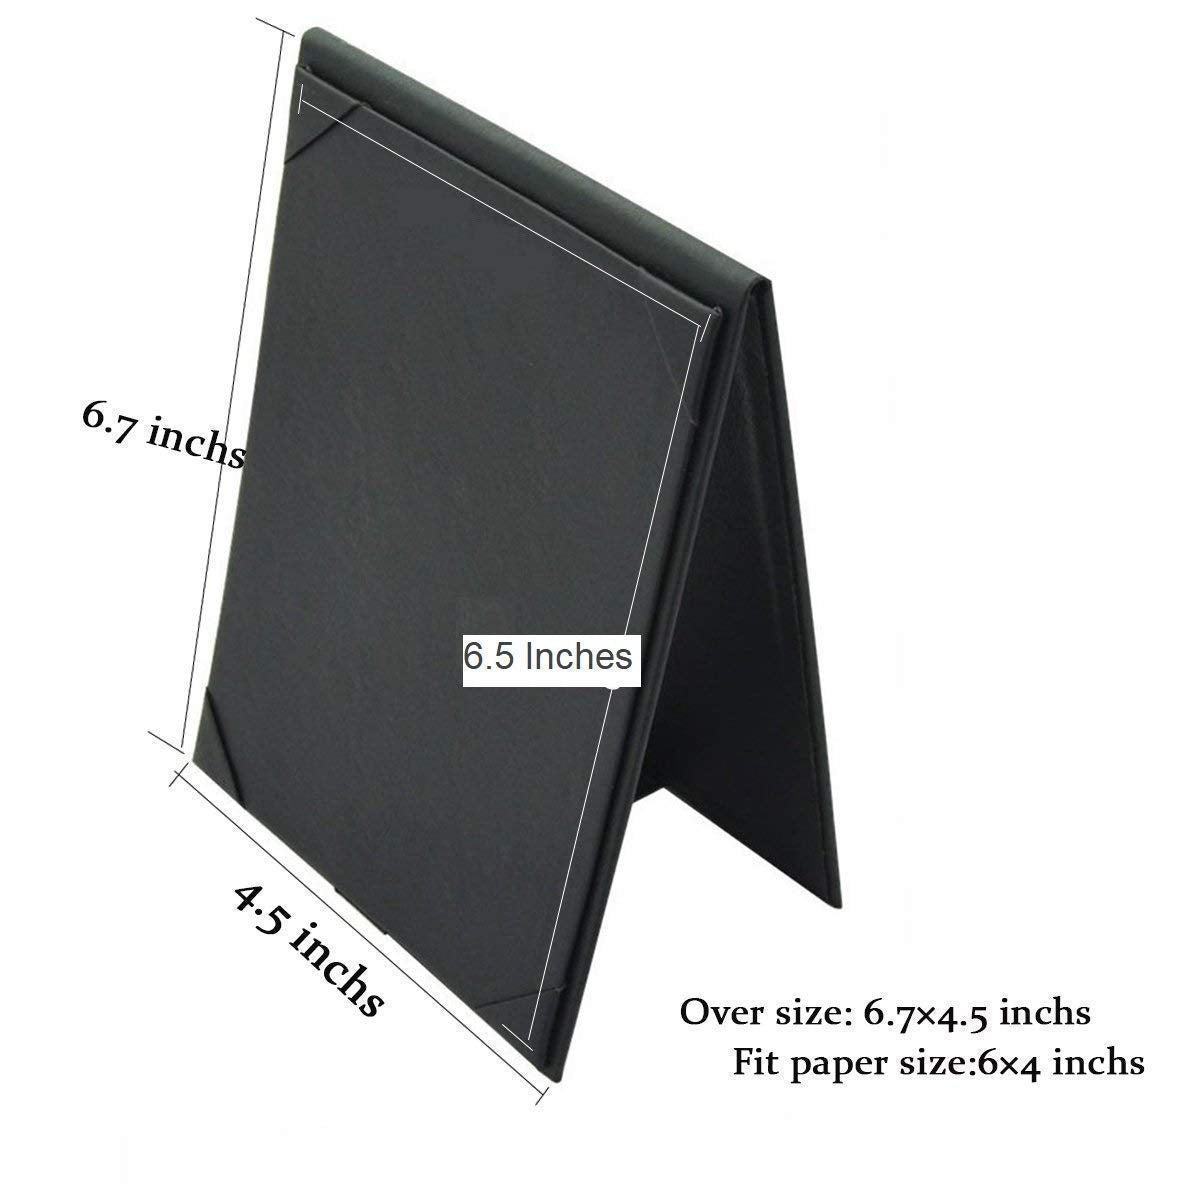 Rudra Exports Leather Menu Sign Display Stand for cafes Bars or Restaurant Presenter, Menu Holder Menu Covers for Specials or Drinks Black